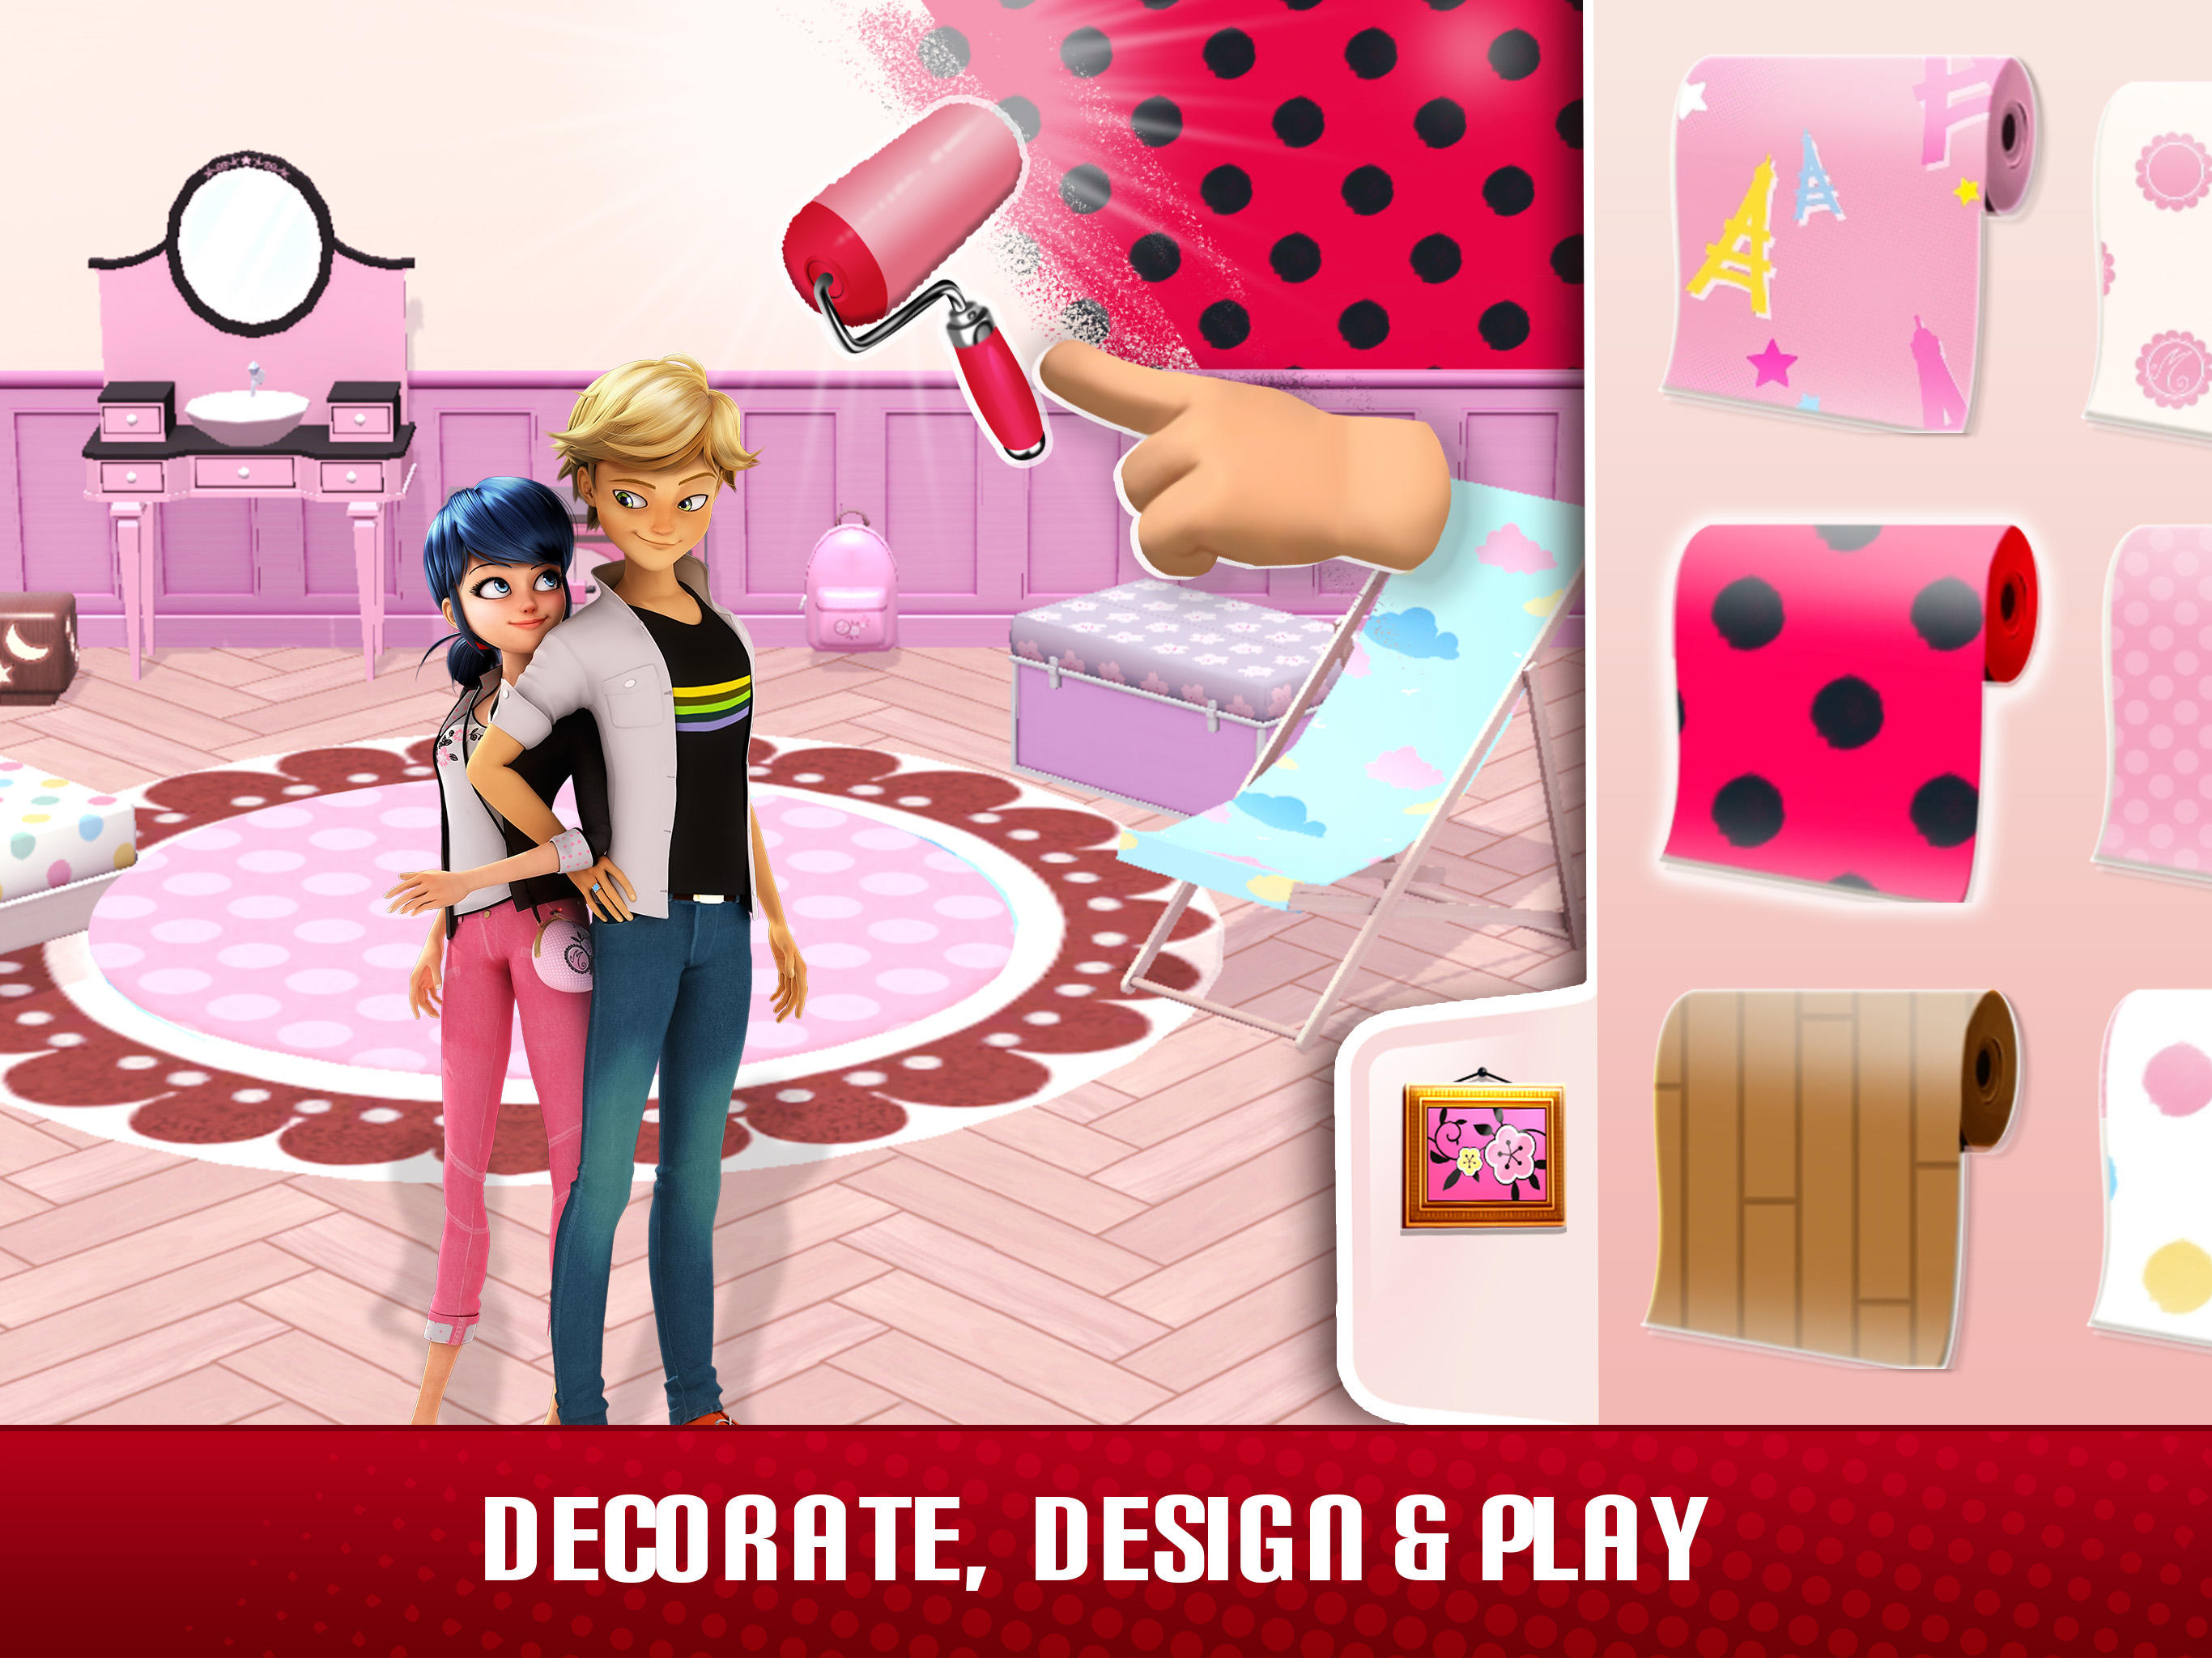 Miraculous Ladybug Dress Game APK for Android Download